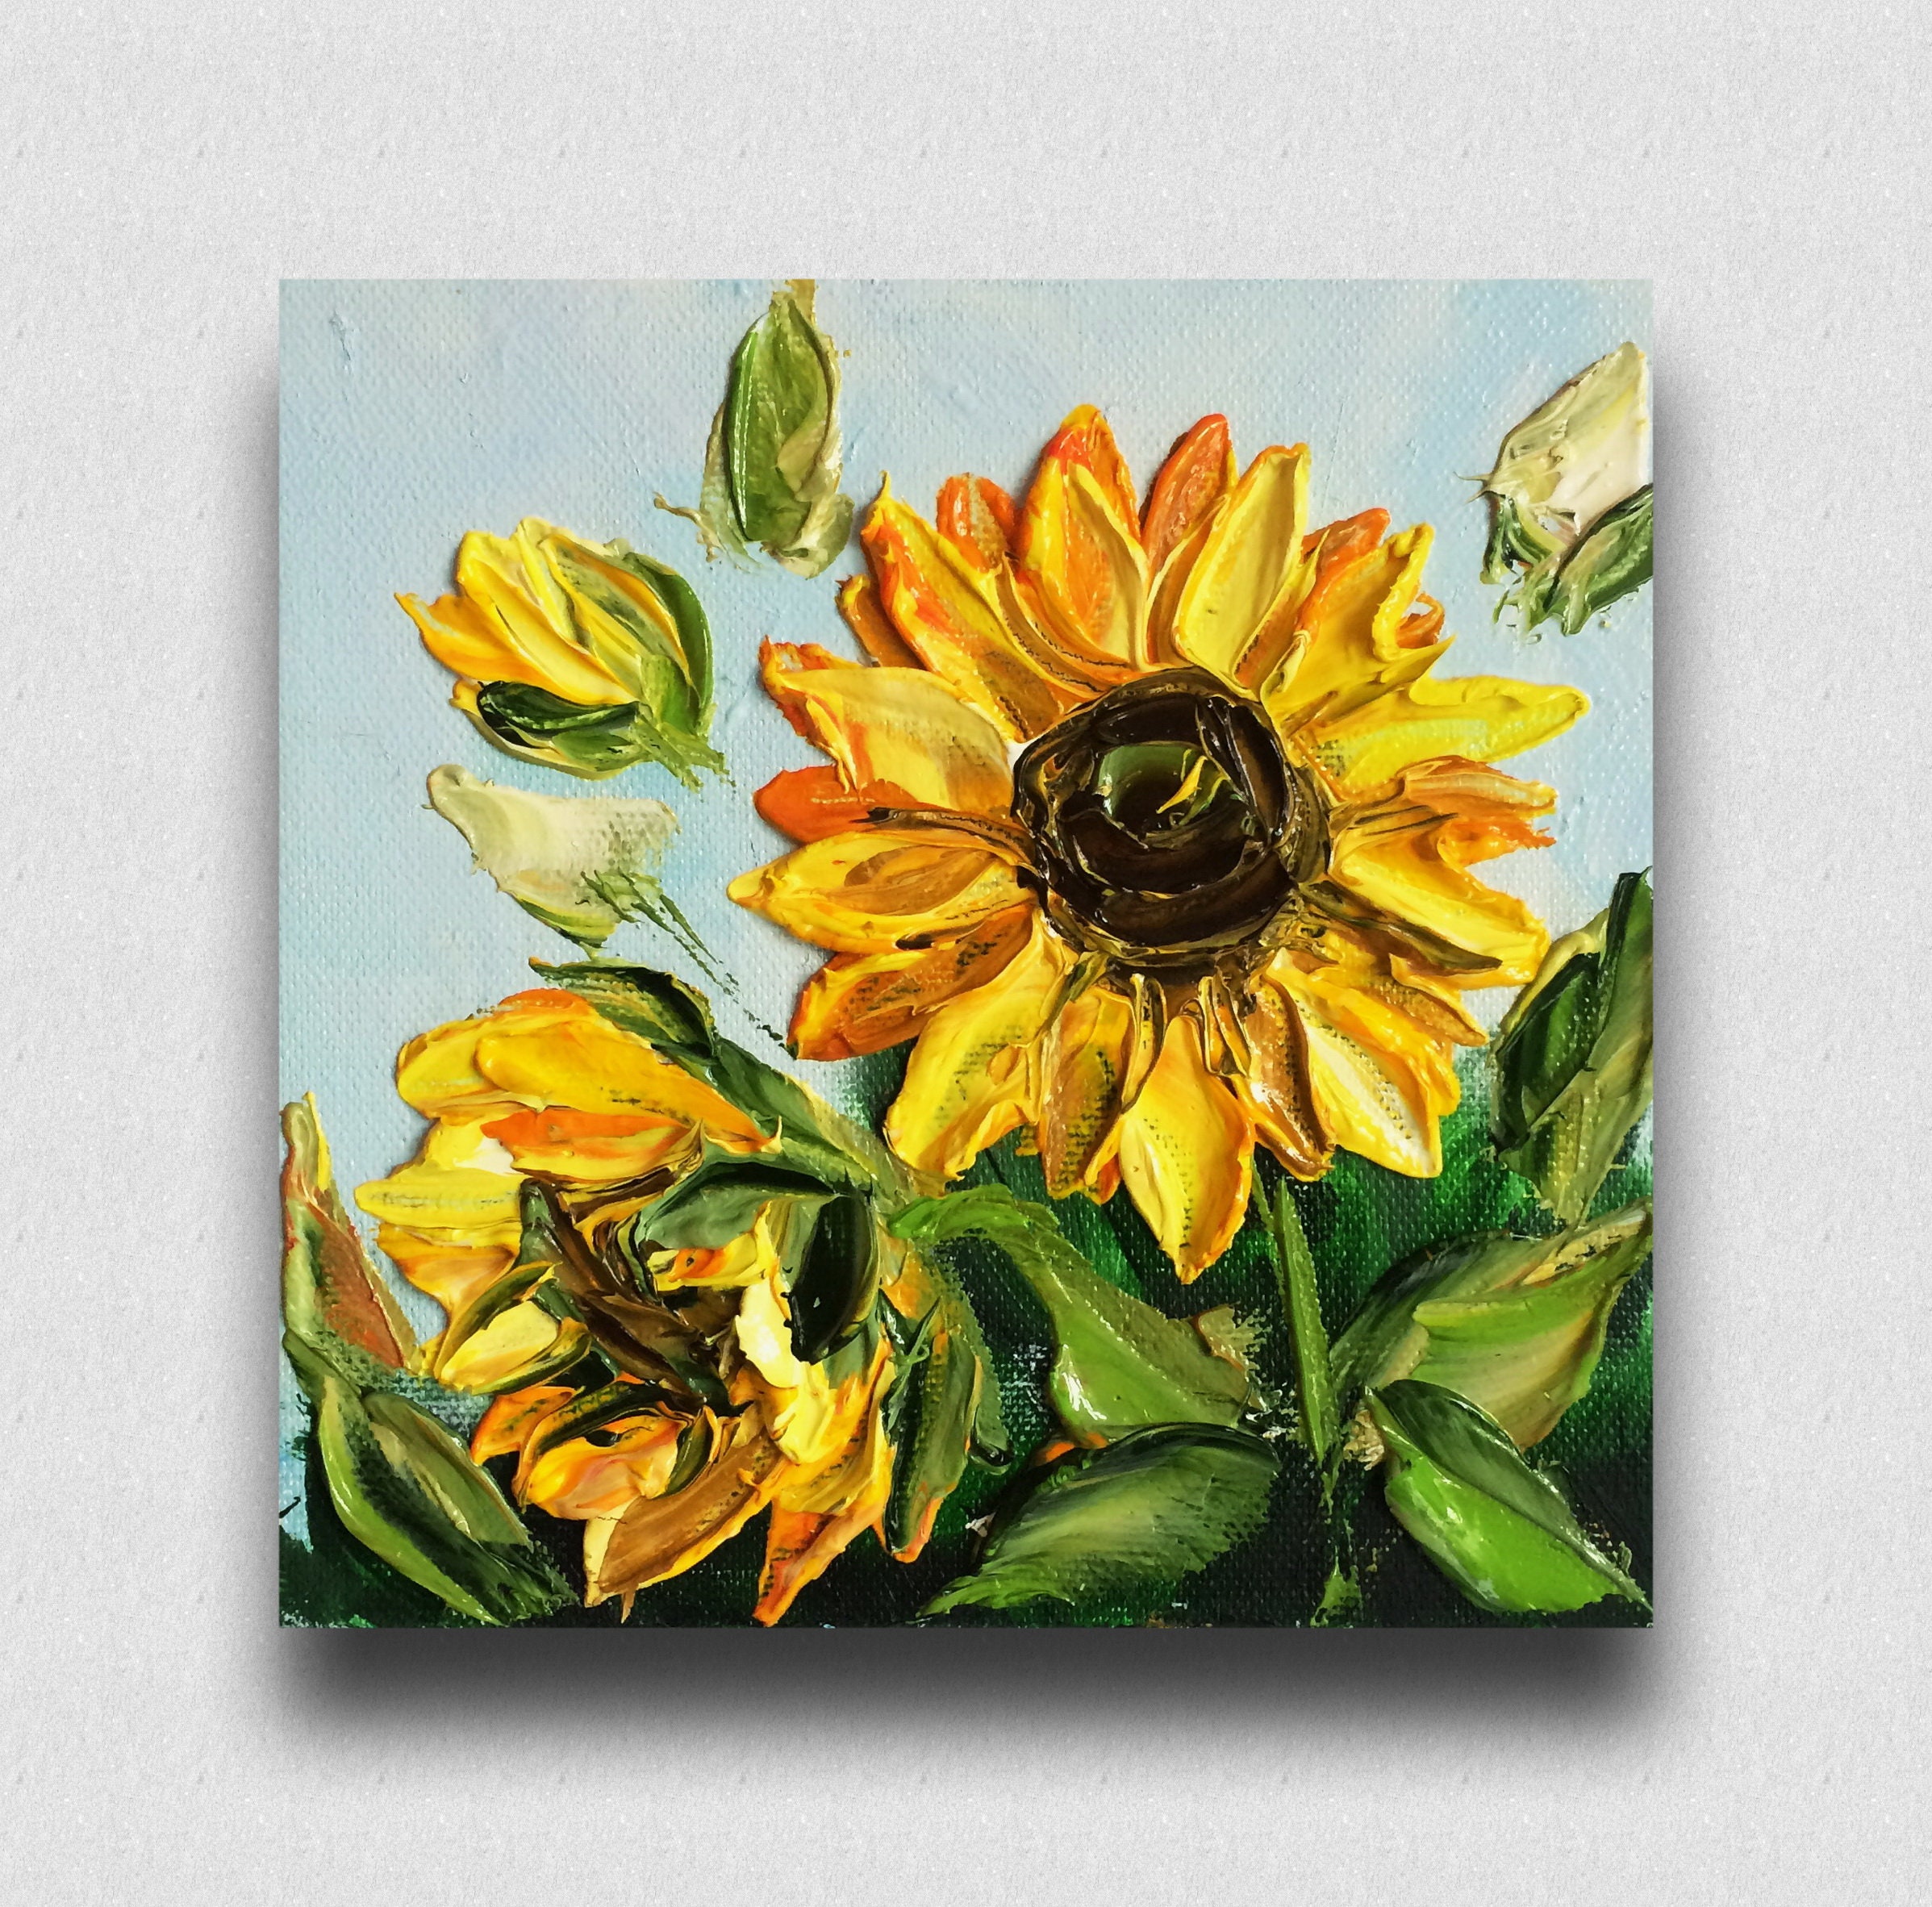 Buy Floral Painting on Canvas. Sunflower Wall Art. Yellow Flower Miniature.  Miniature Painting of a Sunflower With an Easel. Little Present. Online in  India - Etsy